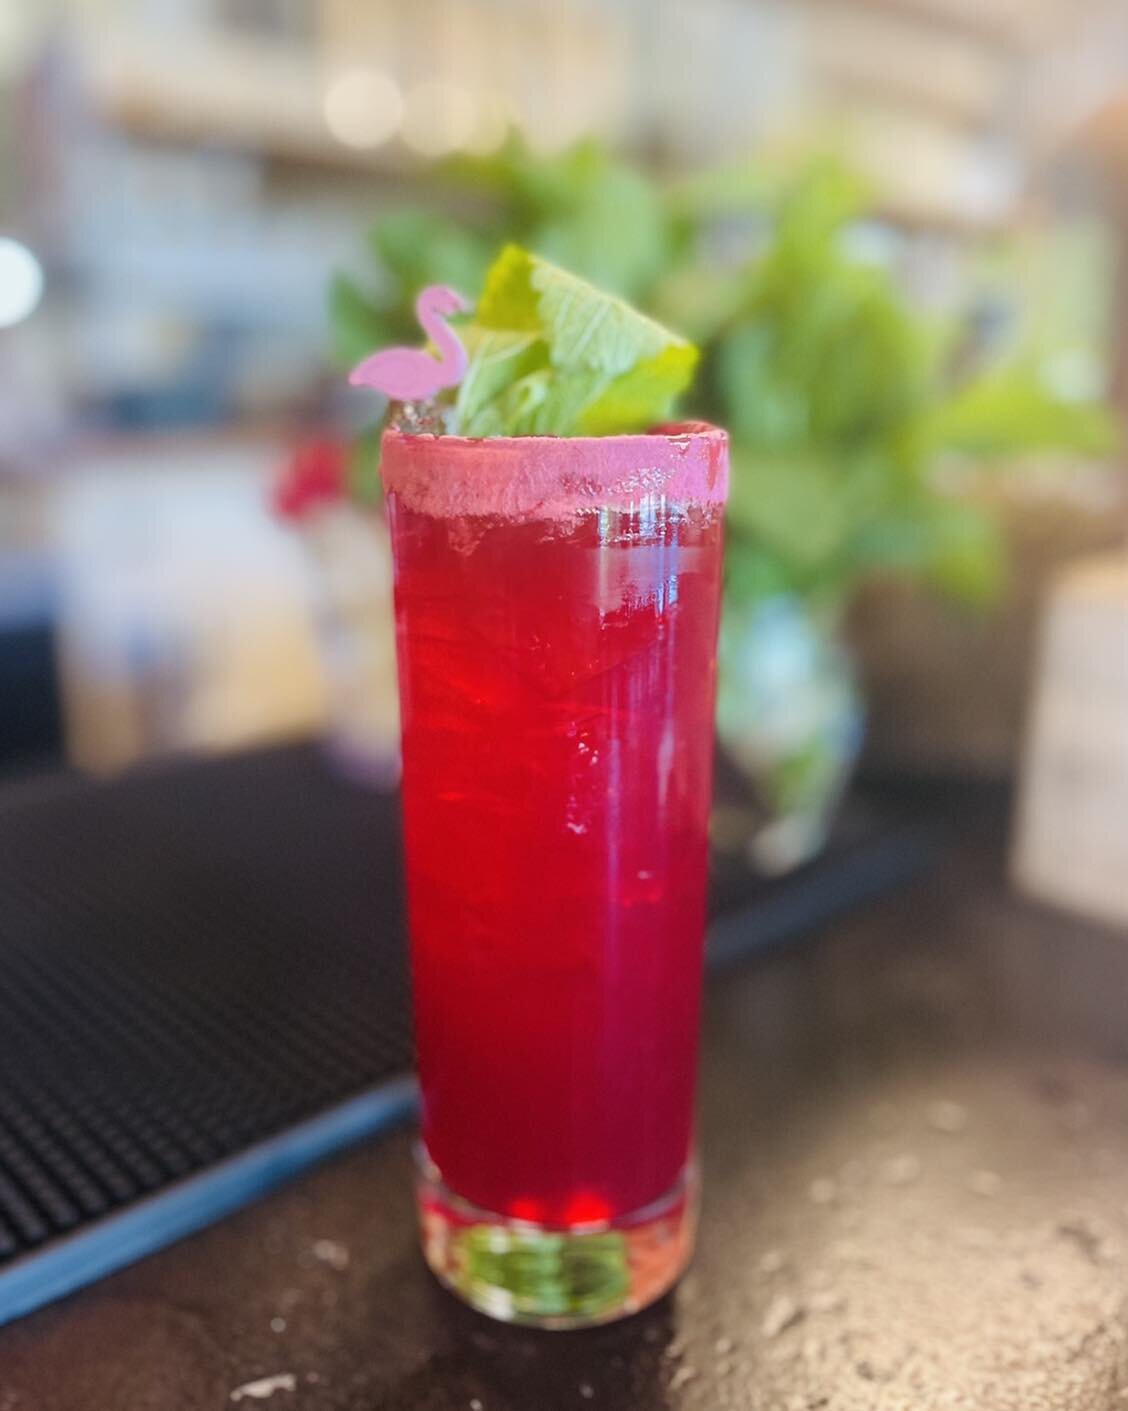 Weather this beautiful warrants a pink flamingo float on this weeks cocktail special&hellip;🦩

Tequila, hibiscus syrup, organic lime juice, lemon balm and a raspberry powder rim. 

#pinkdrinks #cocktailspecial #drinklocal #thinkglobal  #helloshunshi